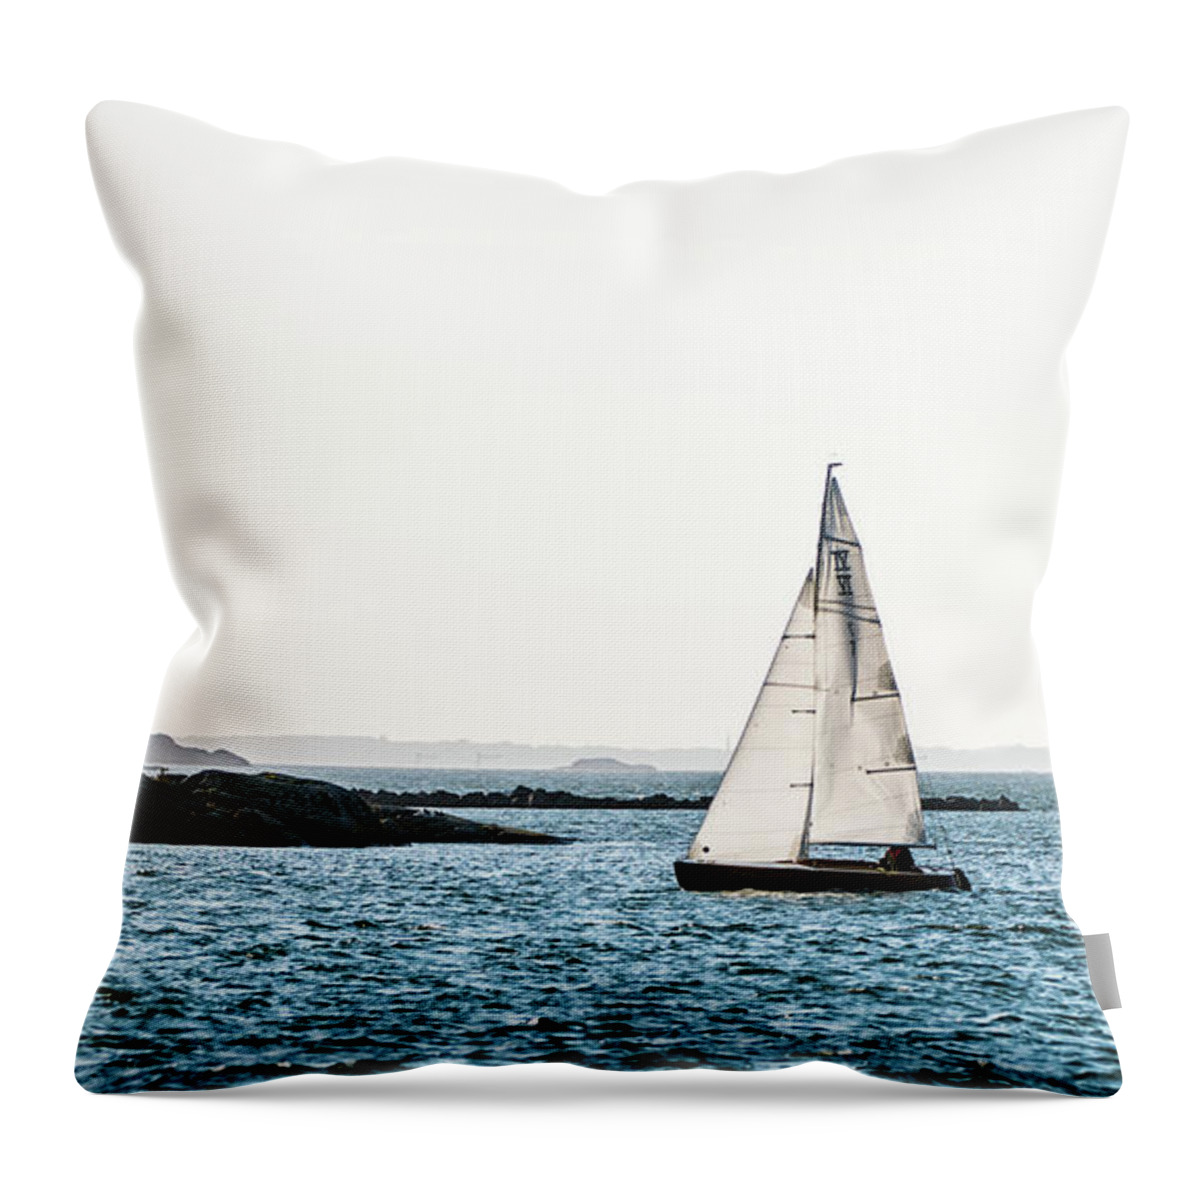 Archipelago Throw Pillow featuring the photograph Archipelago by Torbjorn Swenelius